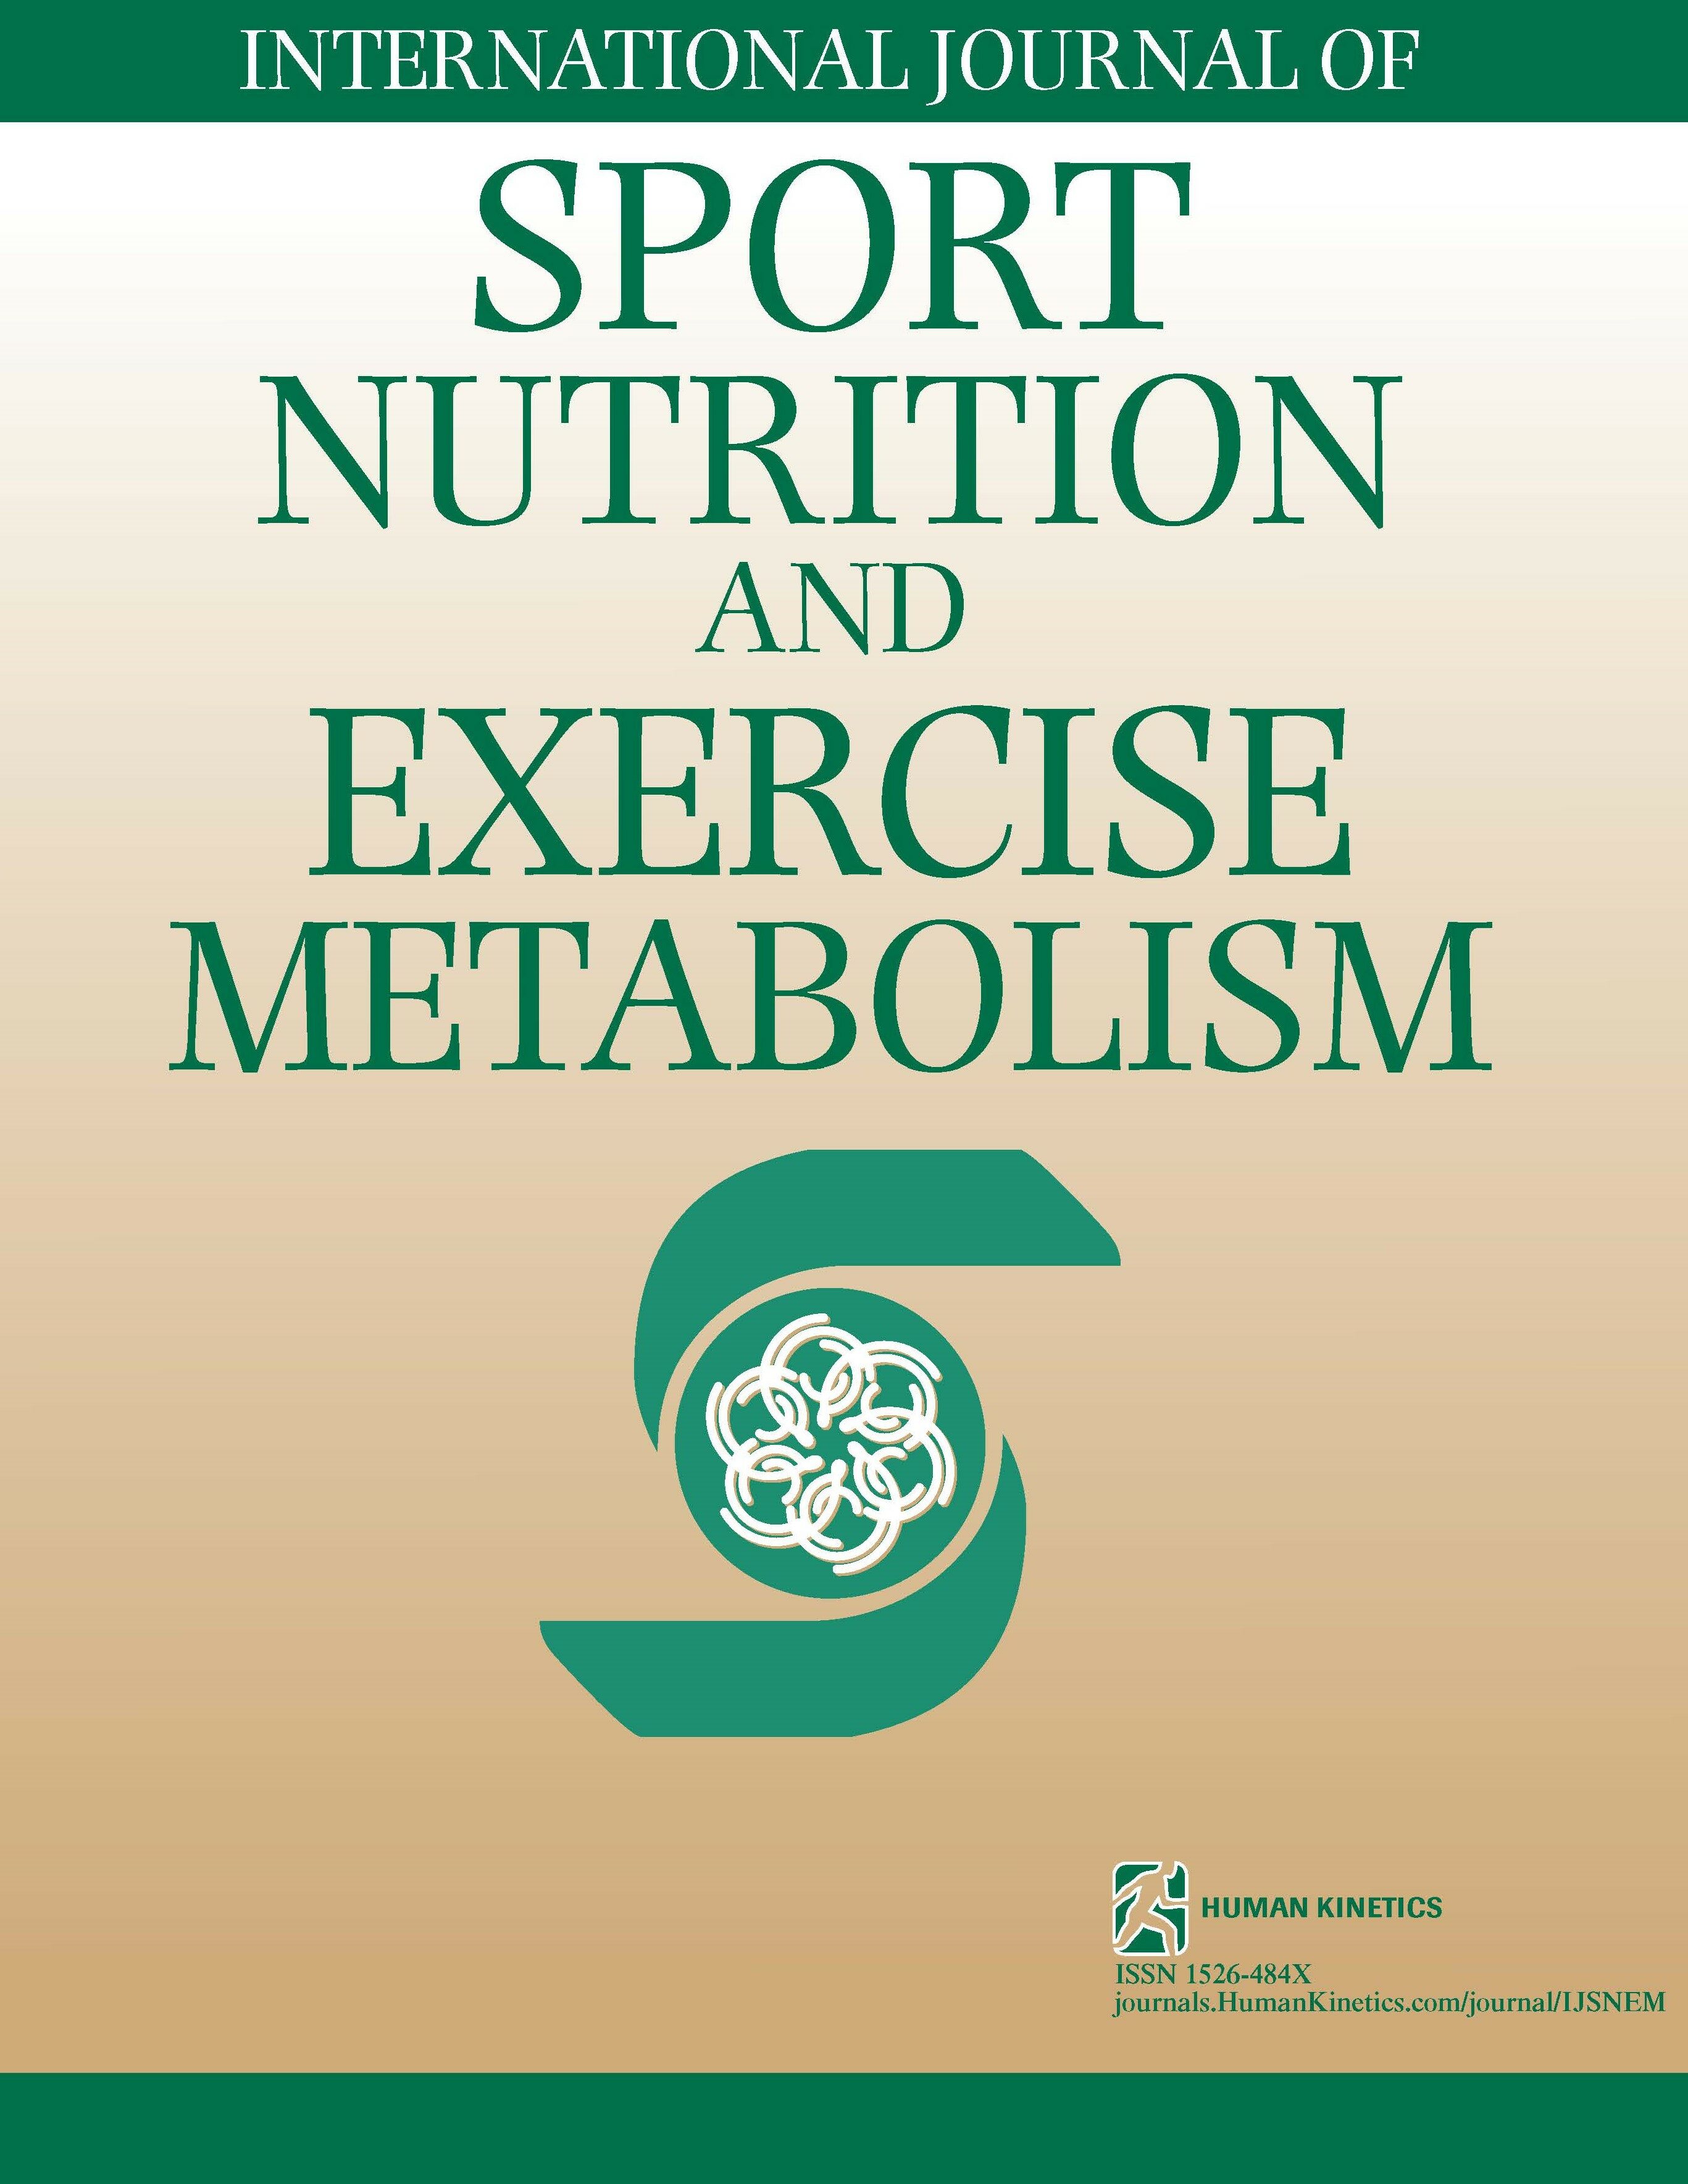 Dietary β-Alanine Intake Assessed by Food Records Does Not Associate With Muscle Carnosine Content in Healthy, Active, Omnivorous Men and Women